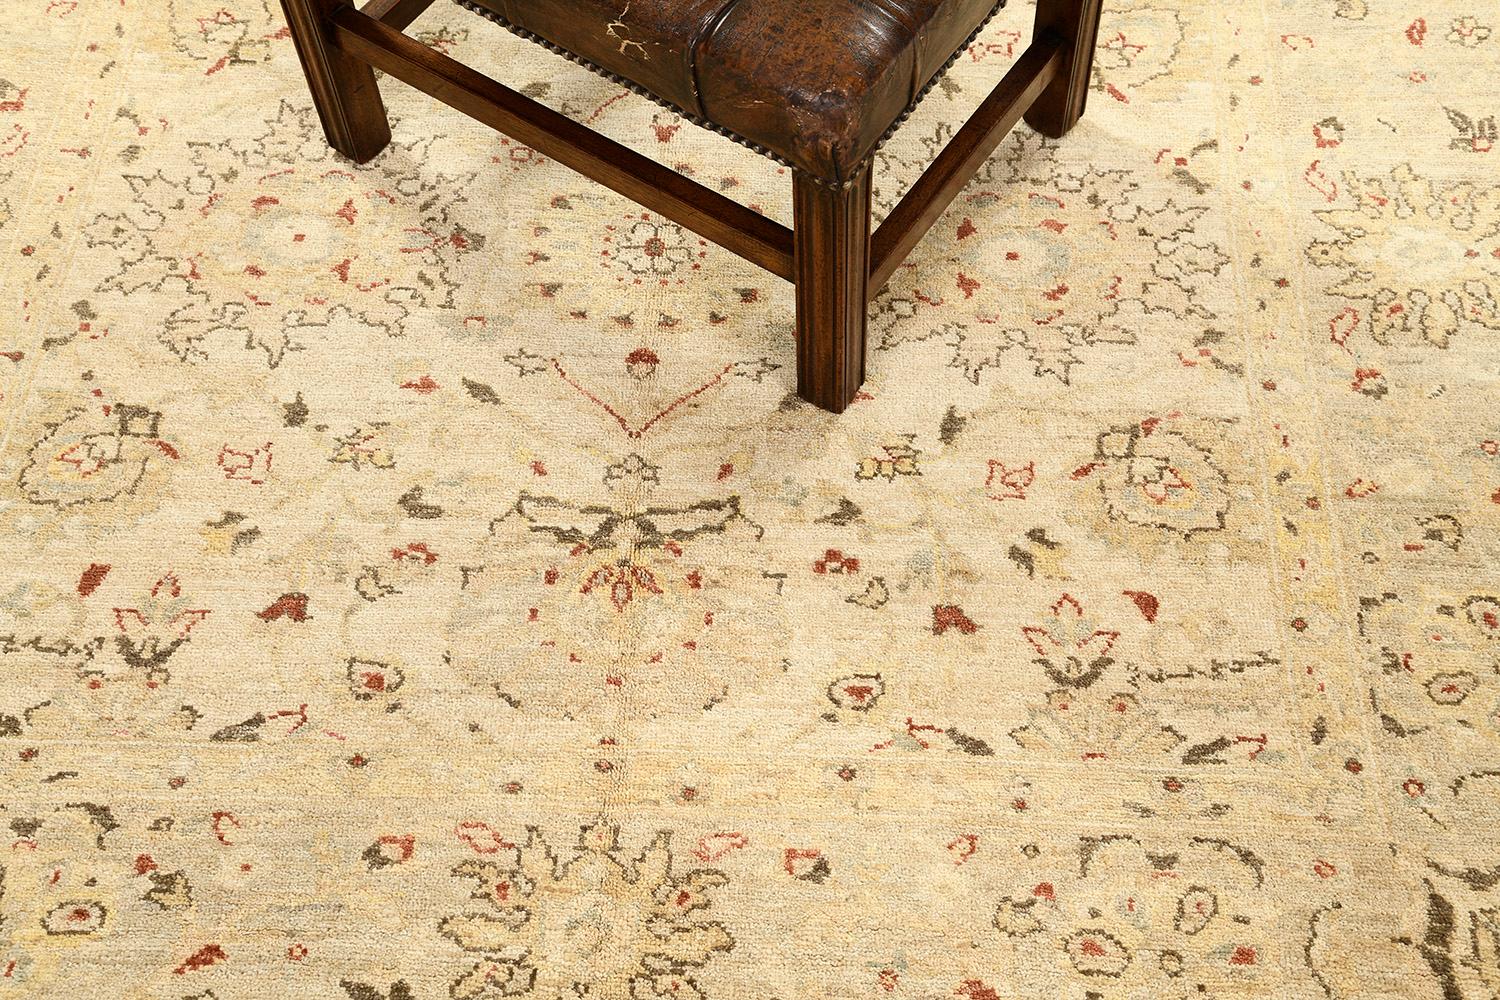 Wonderful vines and florid adornments are expressed through neutral embellishments to blooming and fascinating oatmeal fields. The borders are beautifully woven that created vigorously to form an elegant Zigler Rug. Truly an extraordinary creation